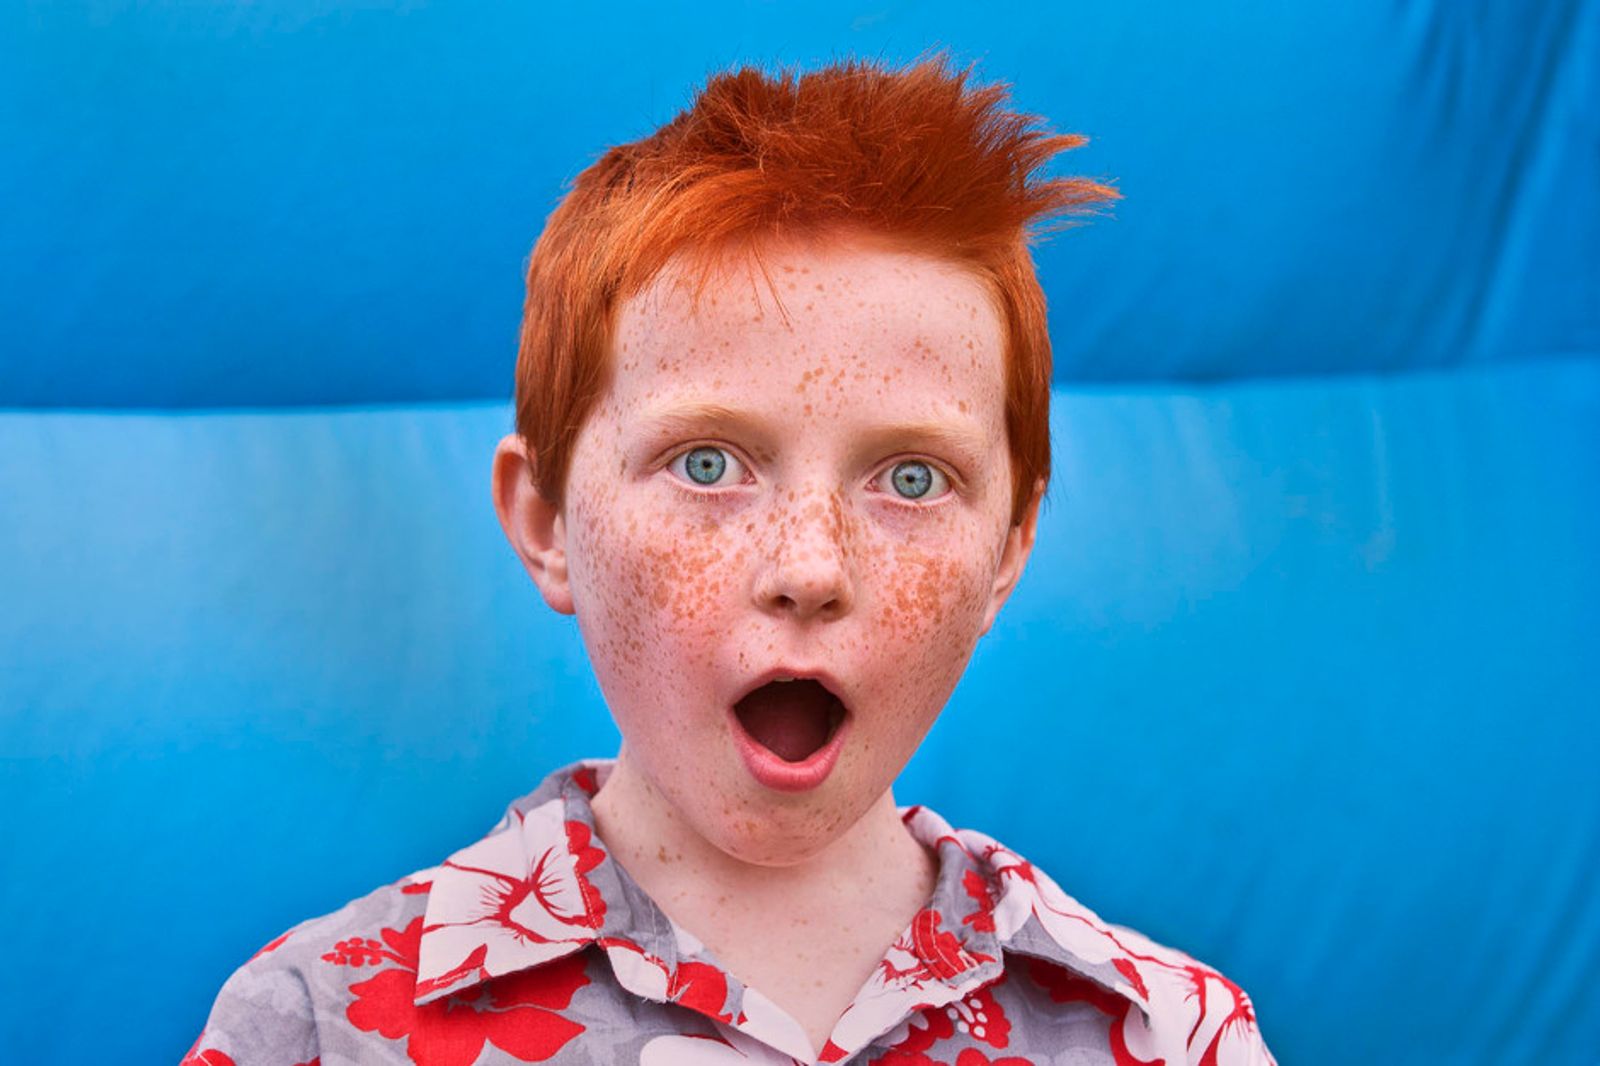 © Steven Edson - Boy with red hair.